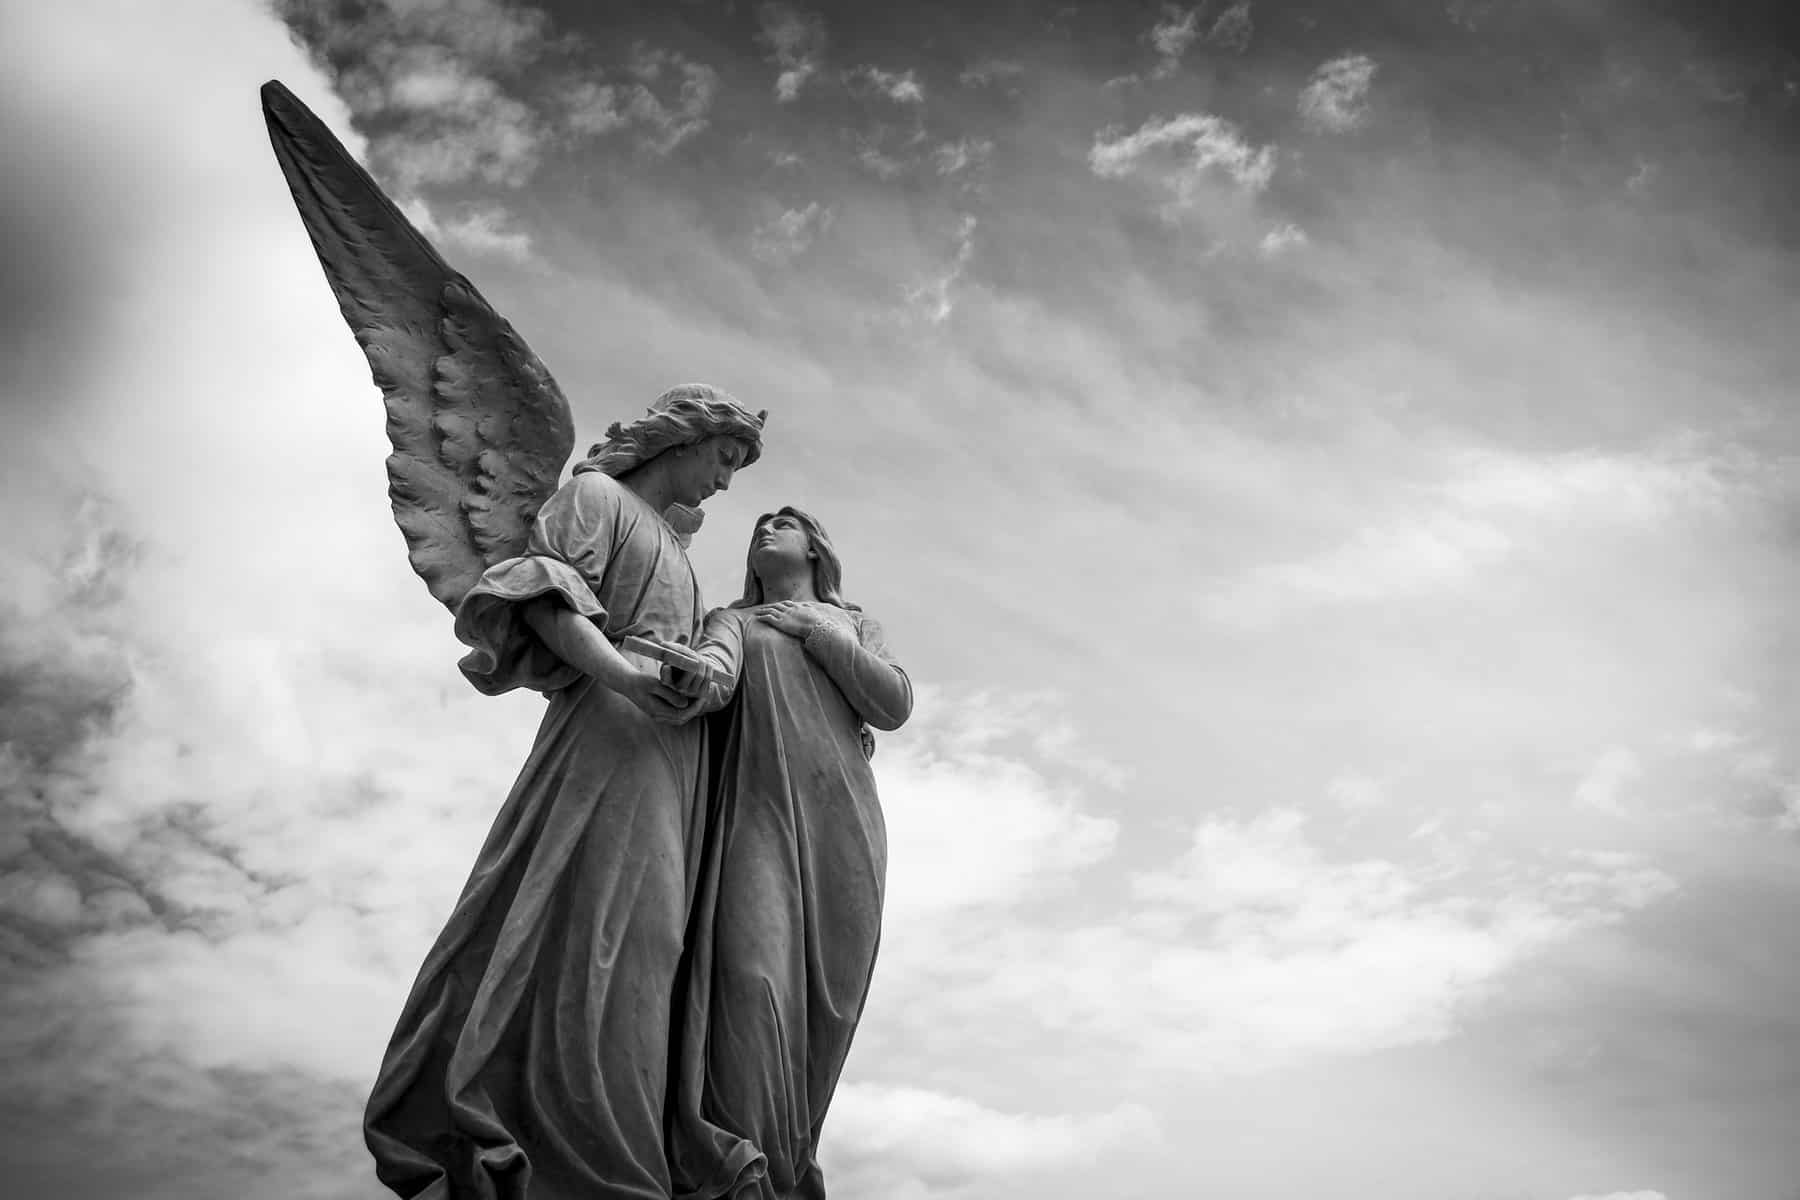 This black and white image shows the statue of an angel appearing to protect a person.